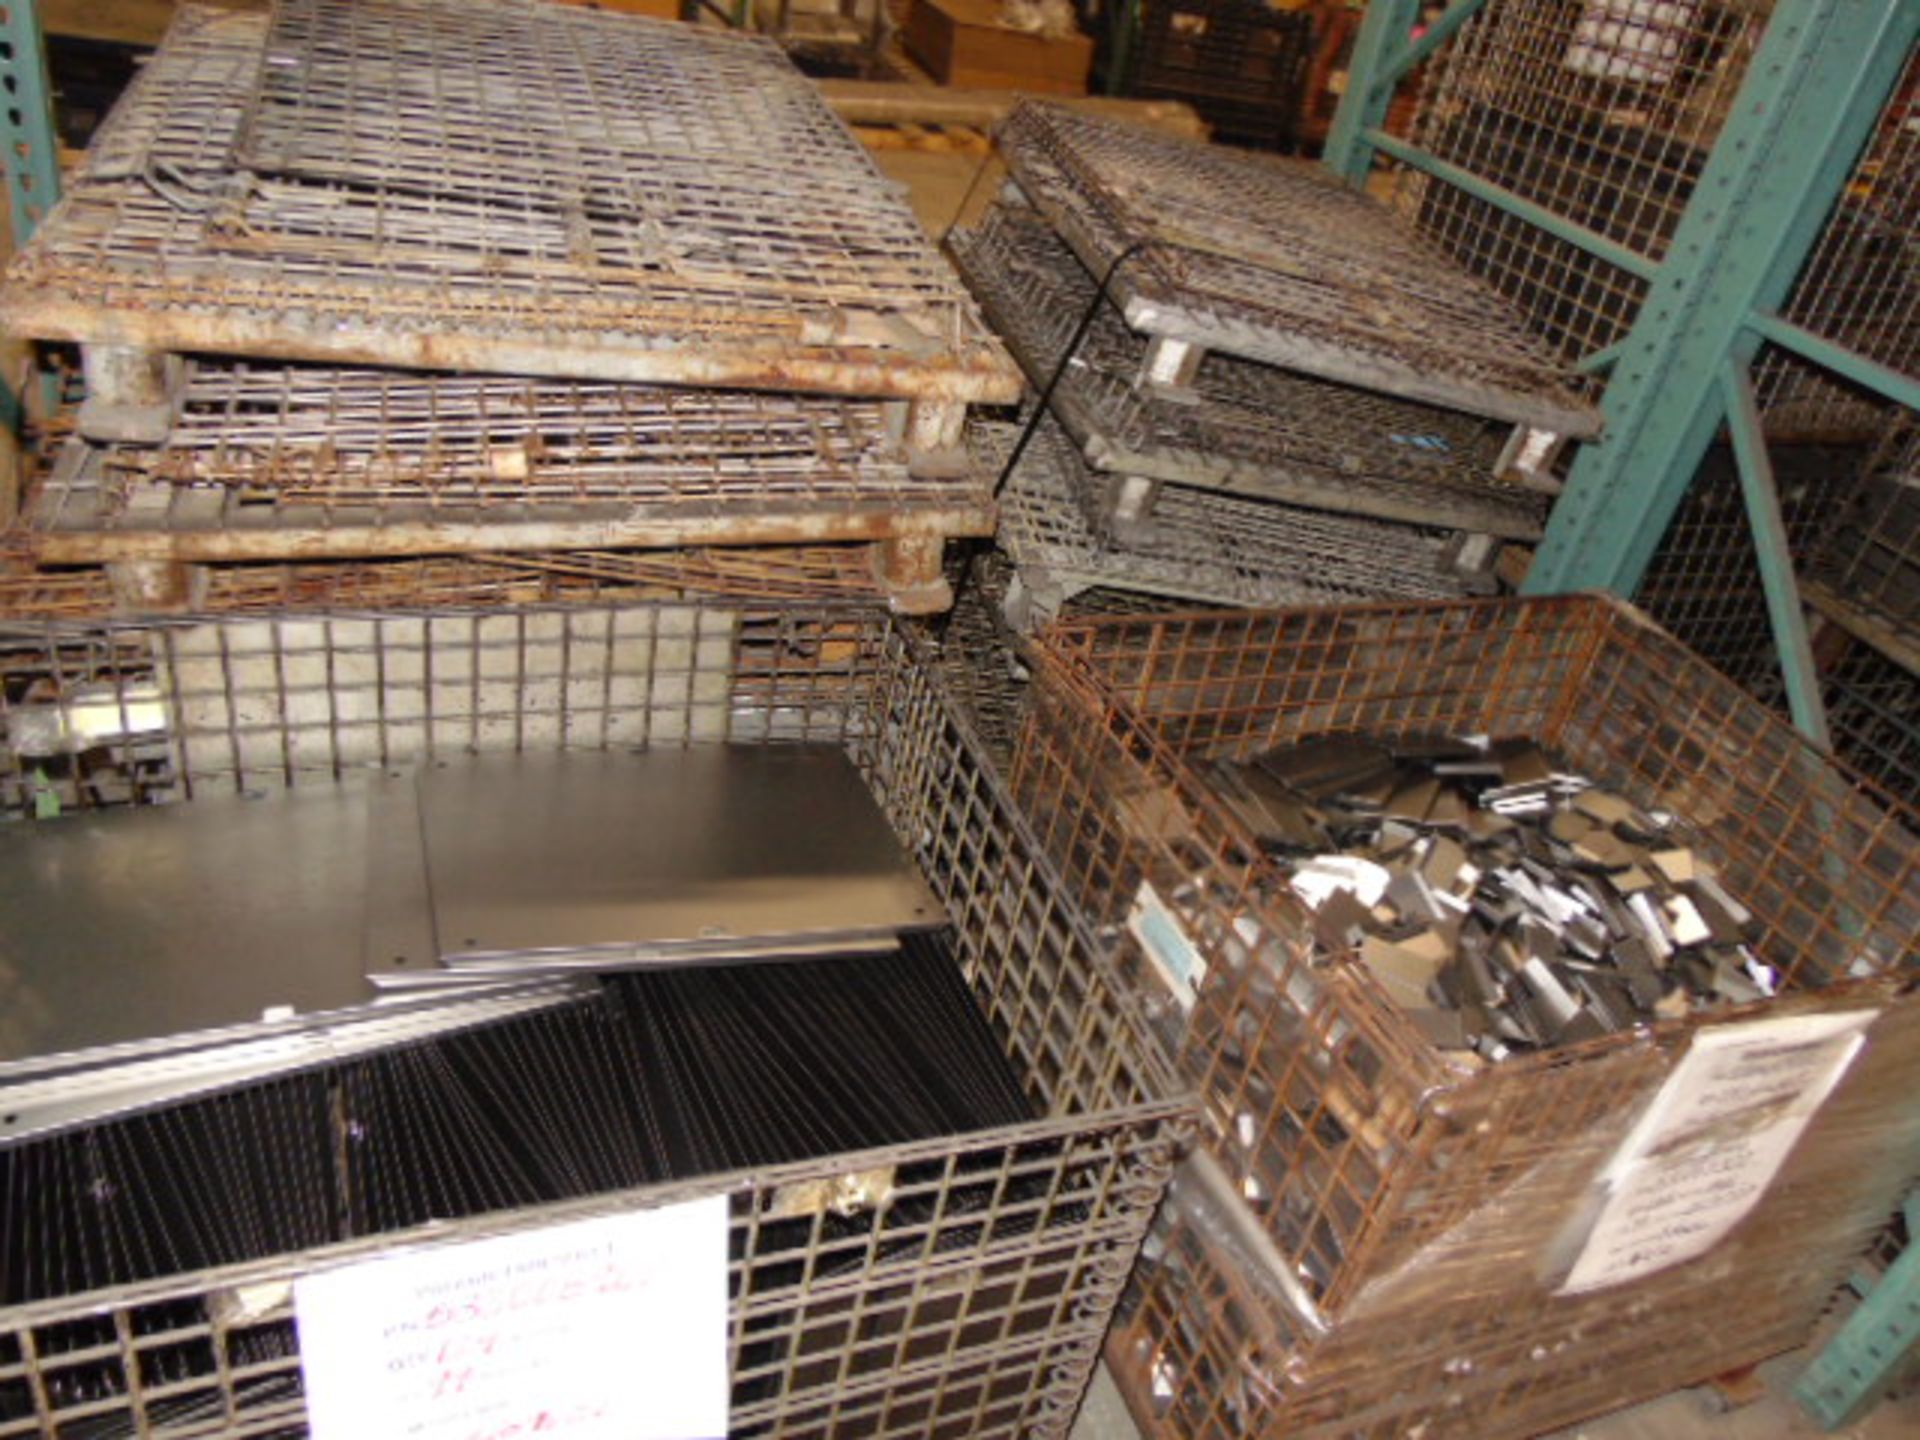 LOT CONSISTING OF: assorted steel in process parts, wire baskets & cardboard (no dies or racks) ( - Image 25 of 39